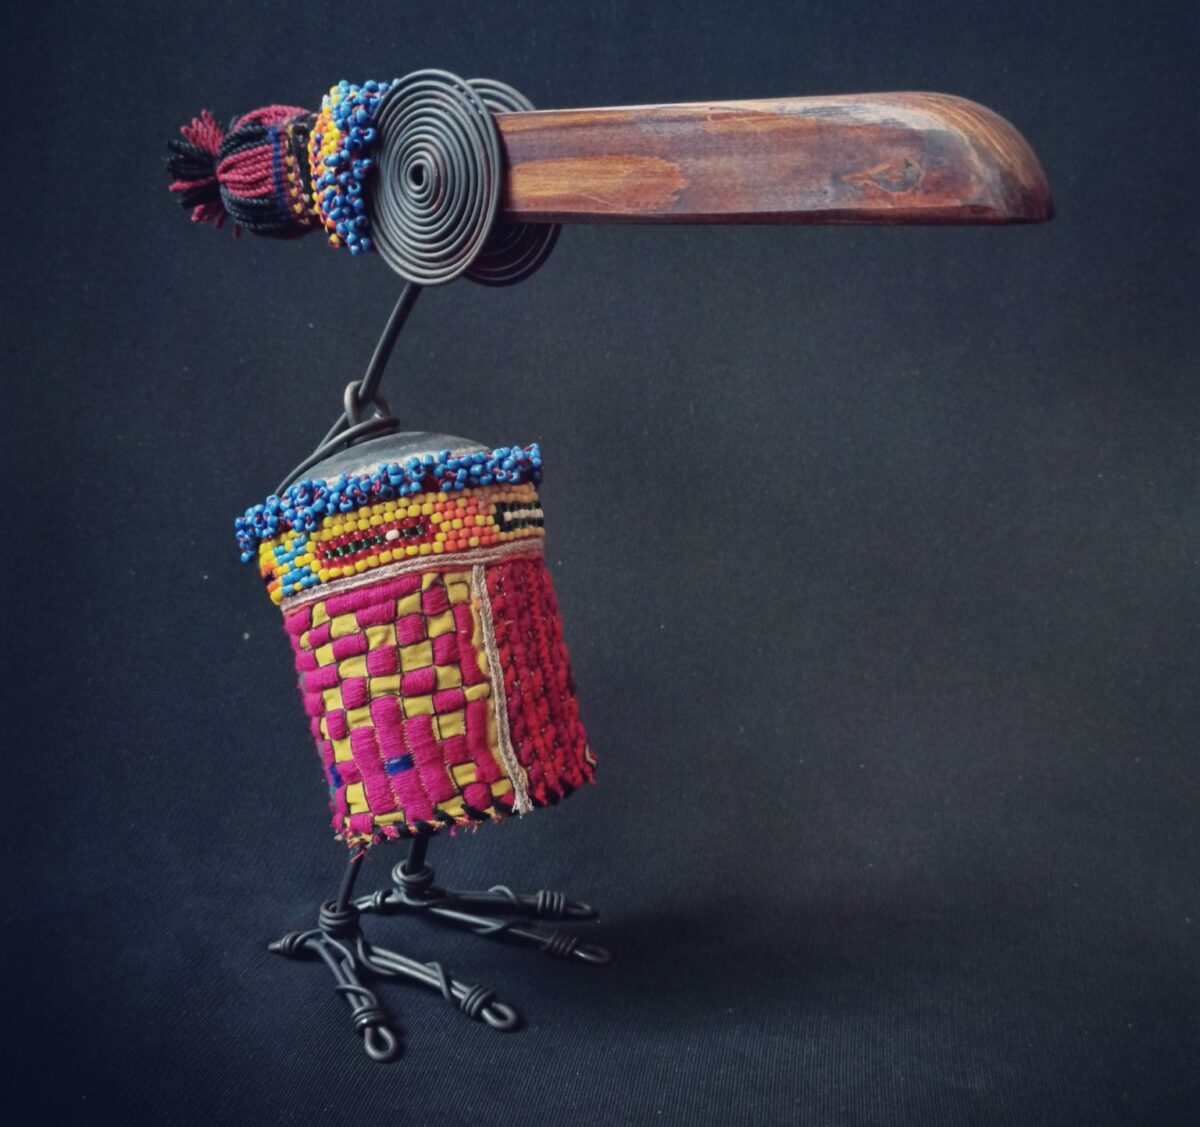 Animal Like Quirky Creatures Made From Discarded Objects And Materials By Mohsen Heydari Yeganeh (6)